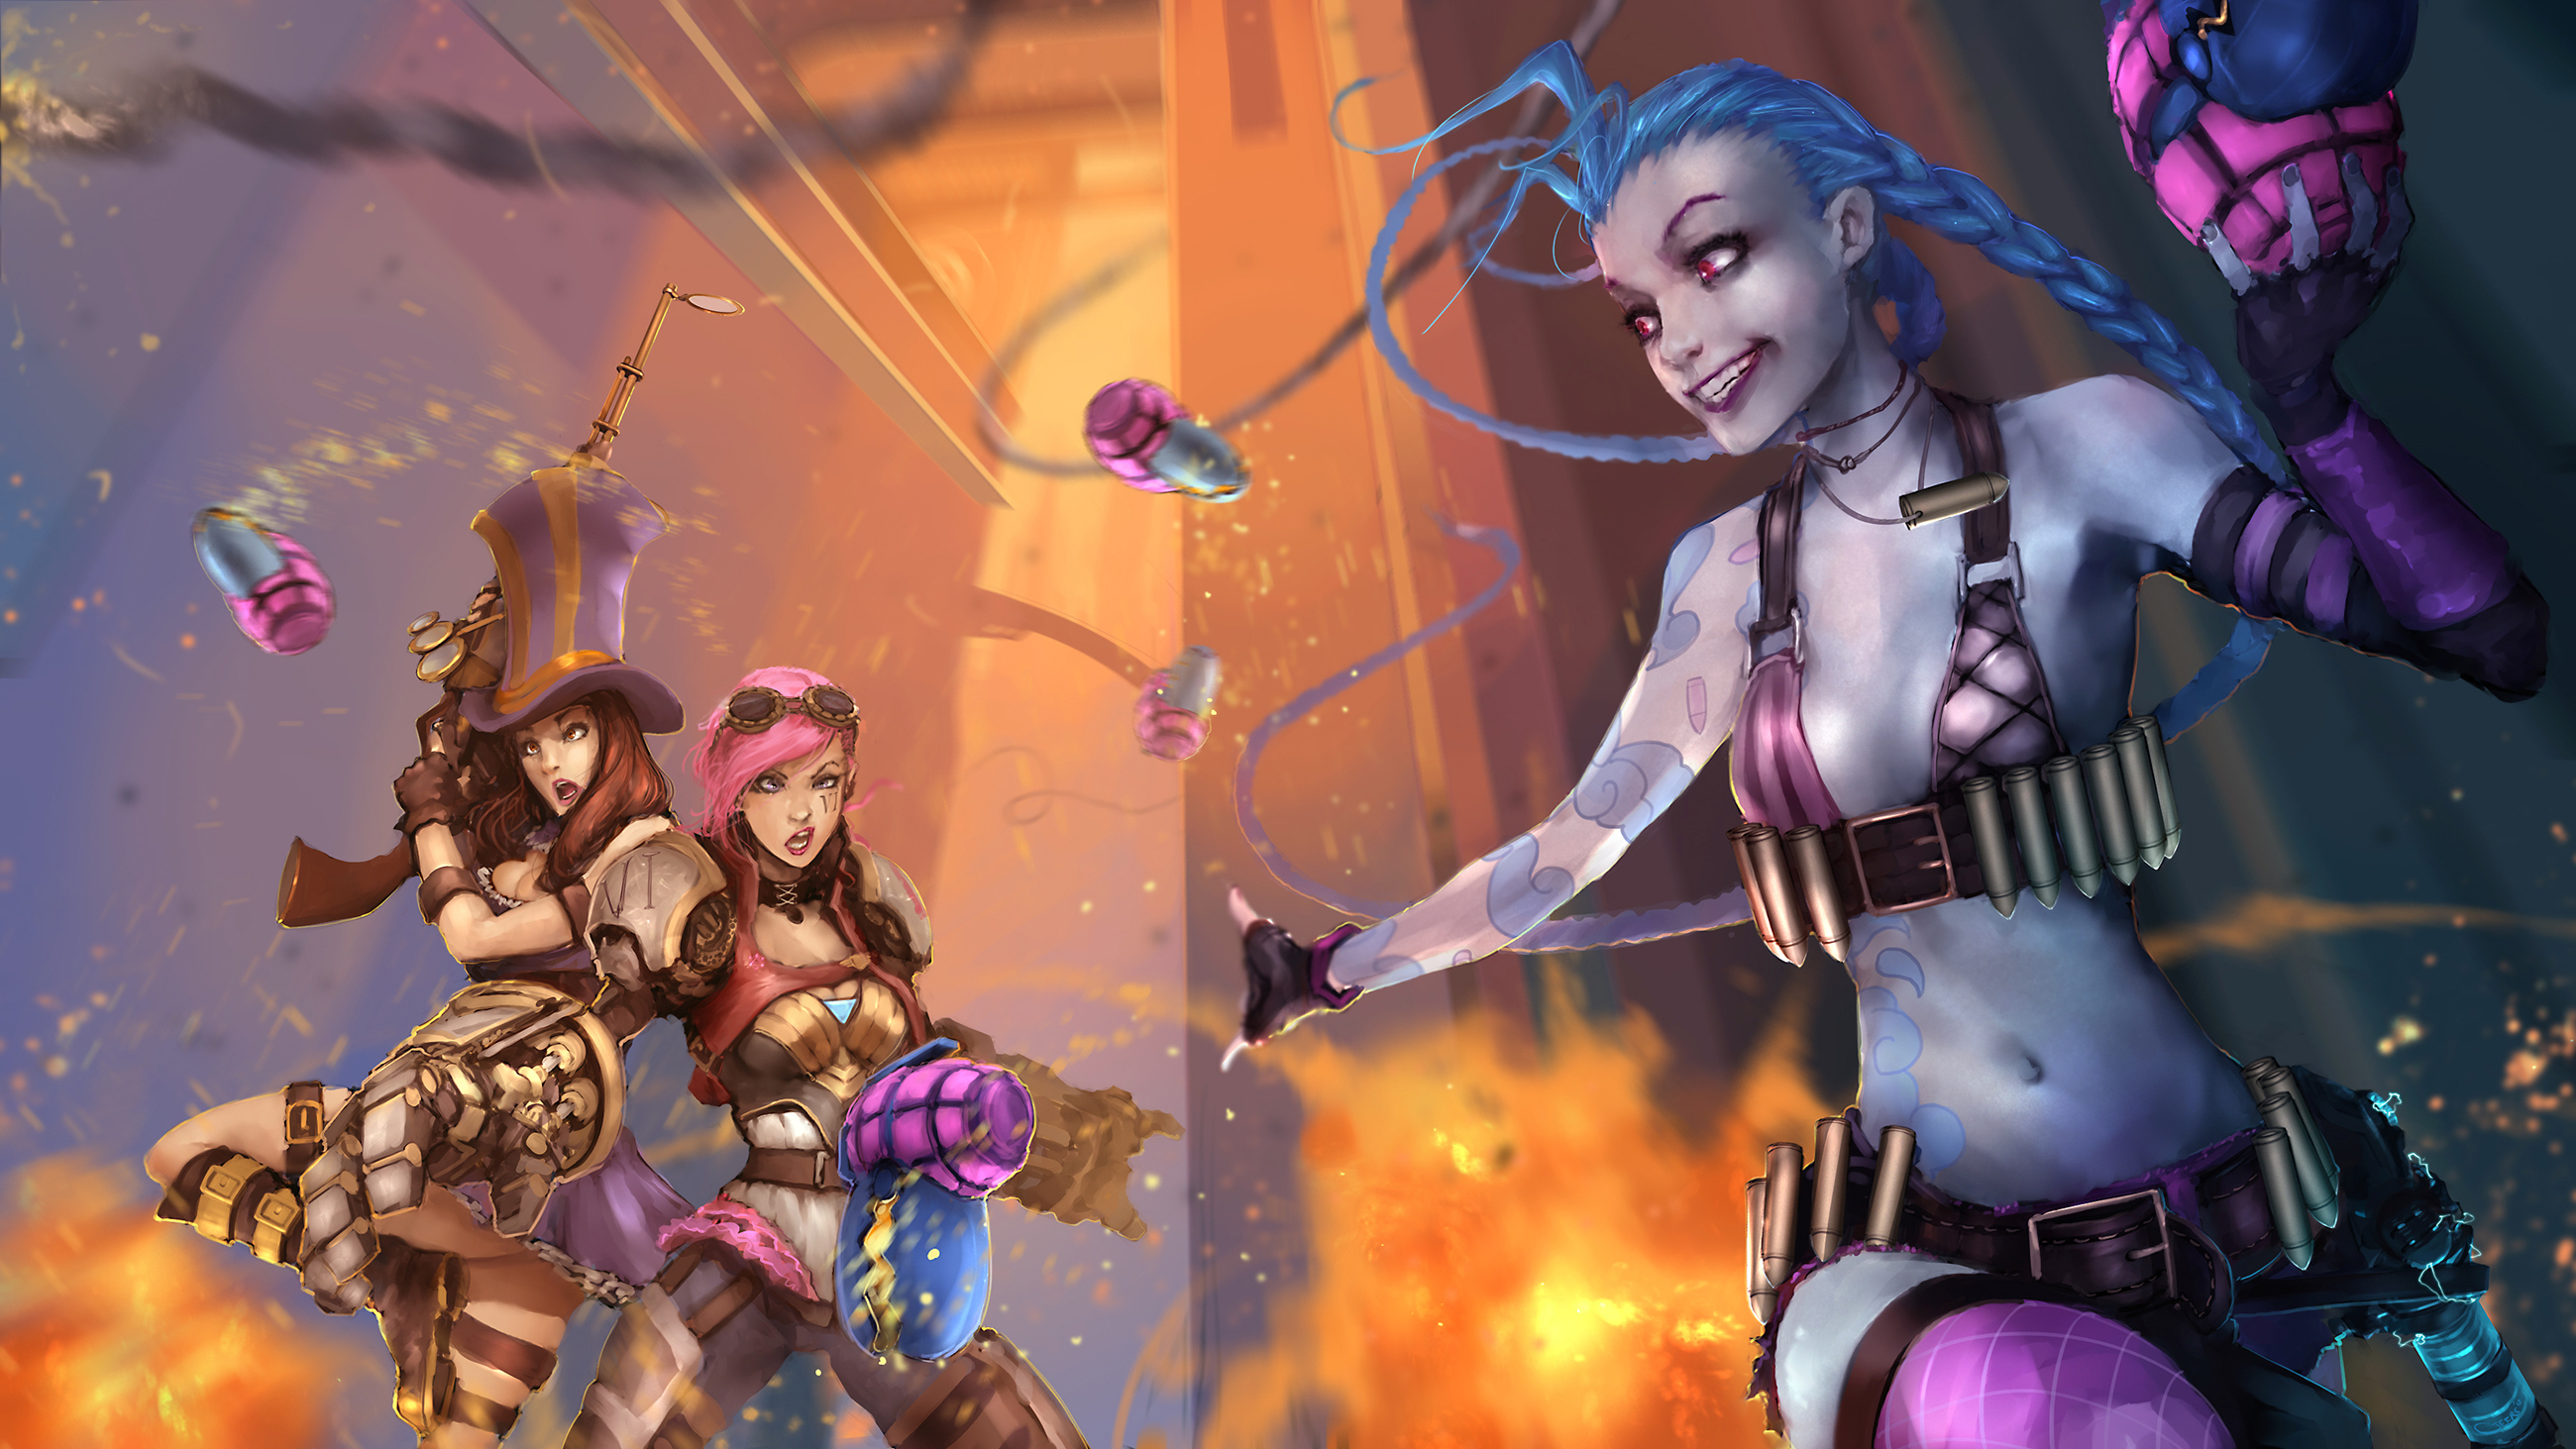 jinx and vi and caitlyn